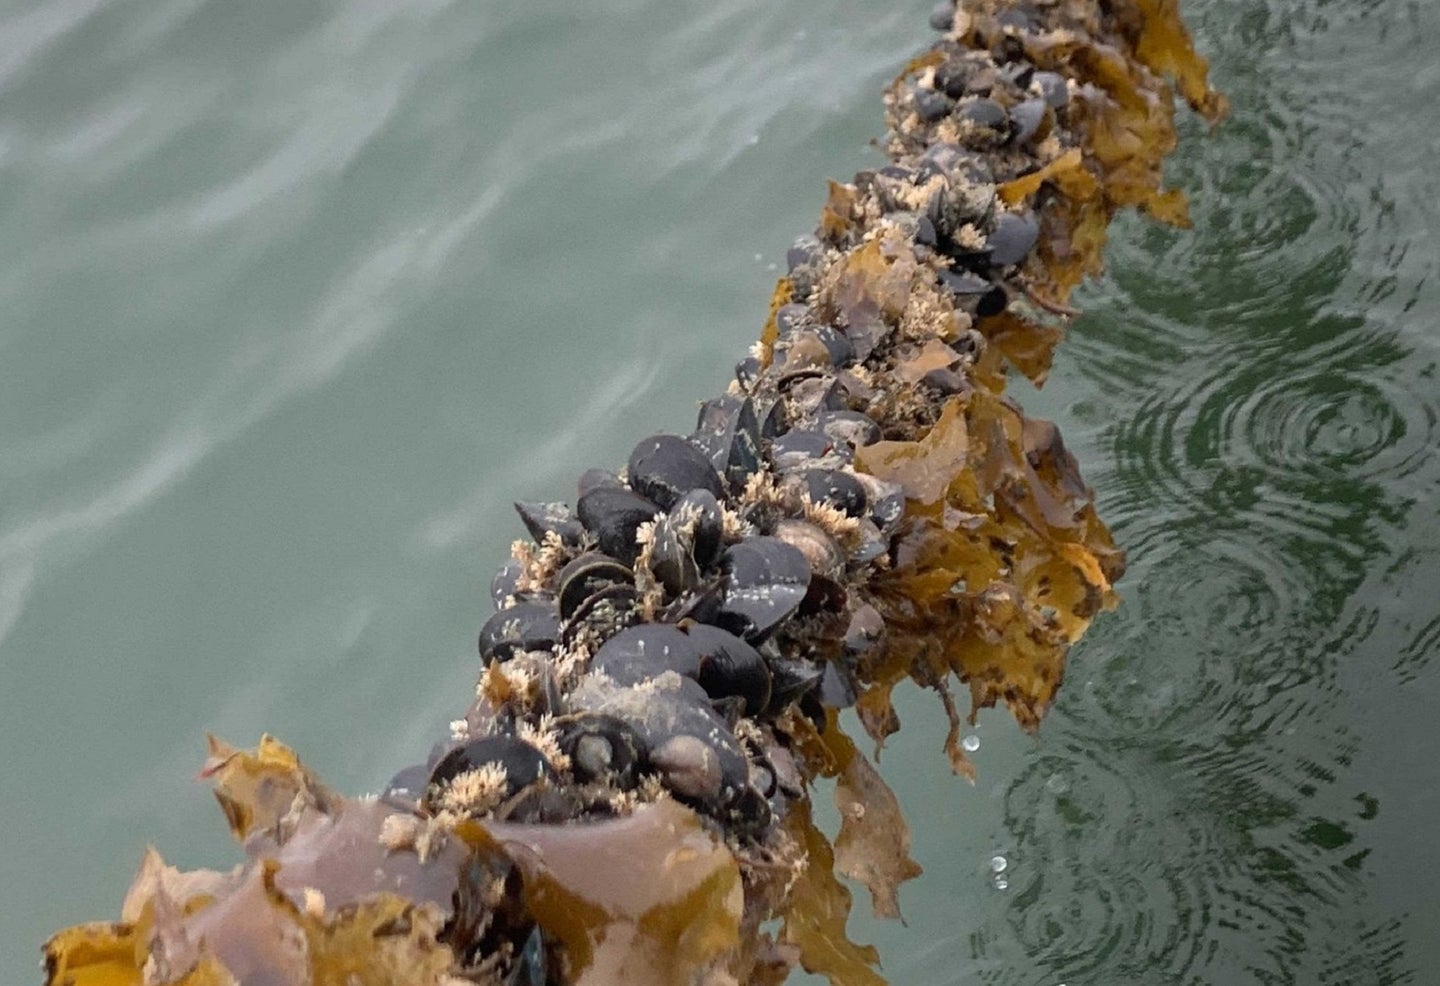 Kelp forest with mussels growing on top